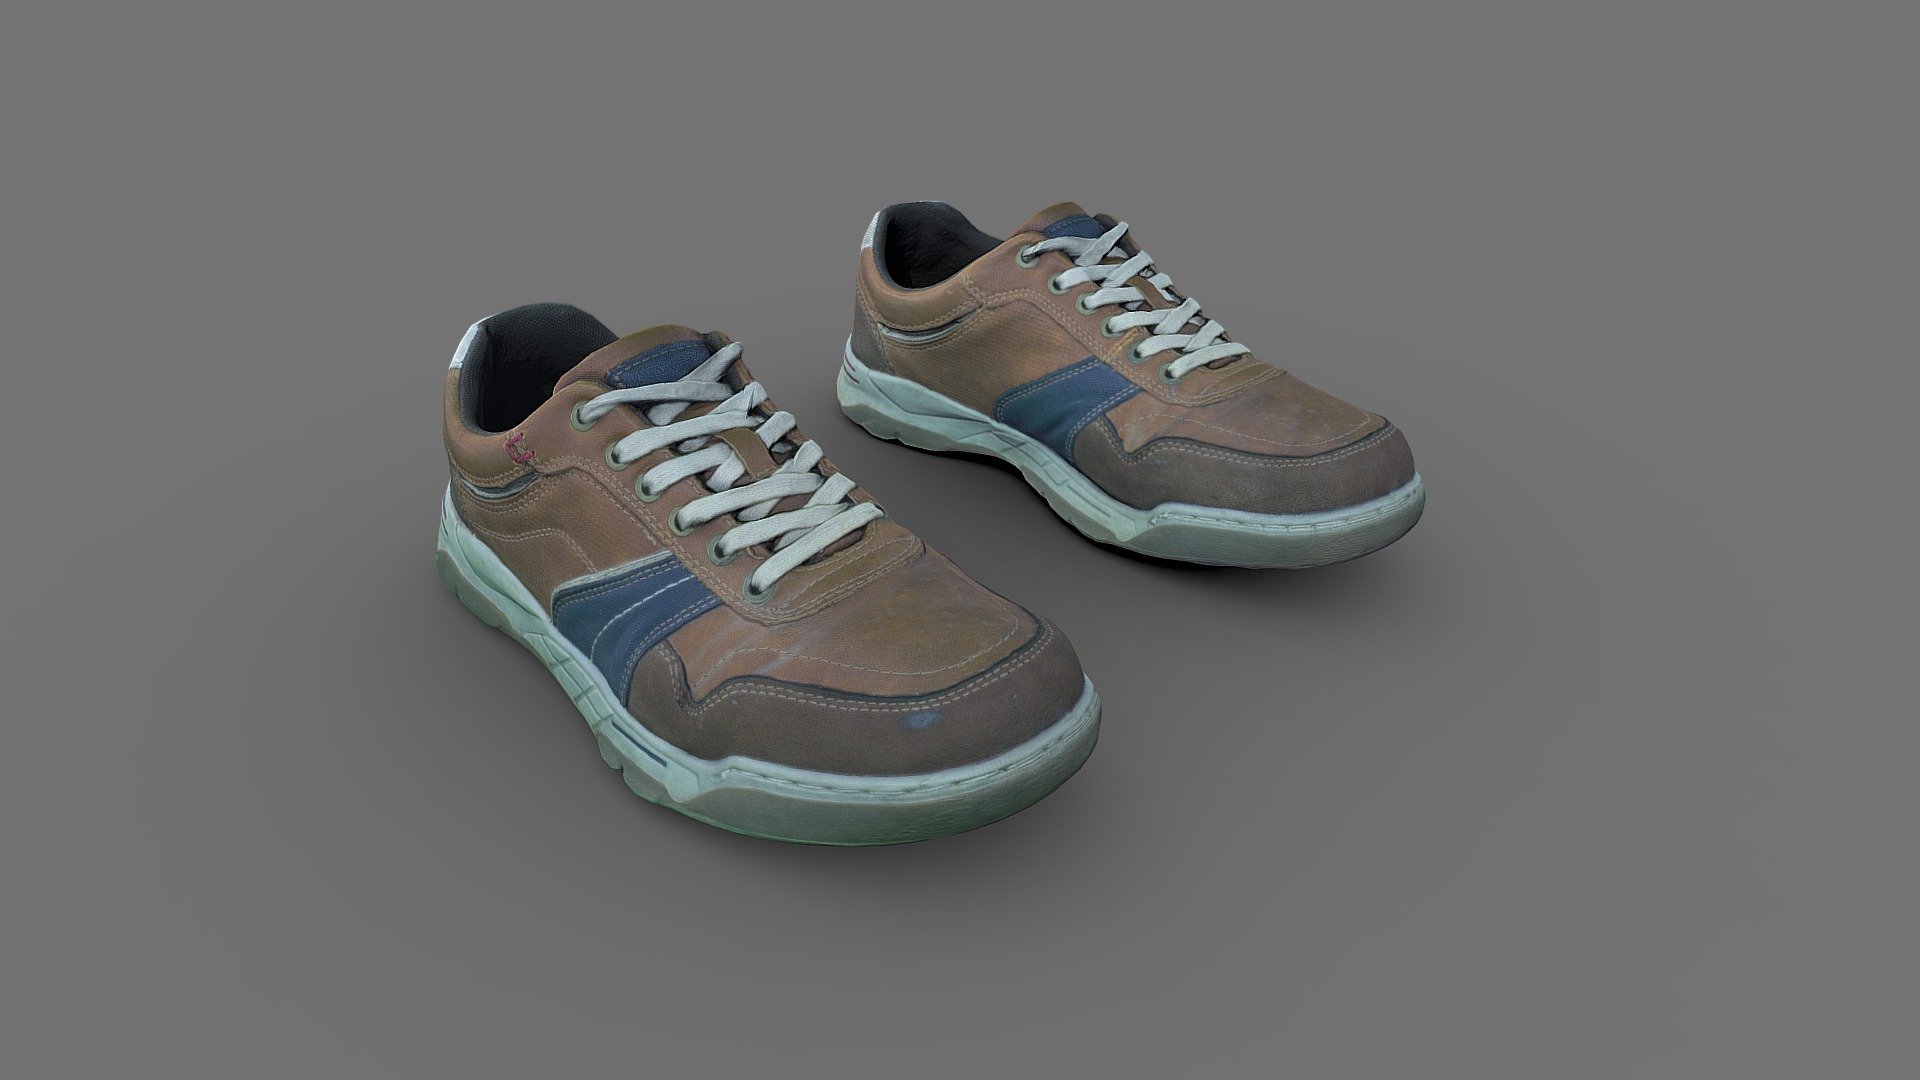 Pair of Sneakers 3D model lowpoly

Right and Left included, as seperated mashes.

Quad topology

Polygon count: 4724 Vertices count: 4726 (per shoe)

Texture map: 81928192 Normal map: 81928192 Occlusion map: 4096*4096

I have created all maps from high poly mesh with polygons that can be used on low poly mesh. Models are usable for games, VR/AR. Contains only quads, and available in multiple formats obj, ma, fbx and ztl (4R8).

Zbrush file contains mesh with multiple subdivisions 3d model